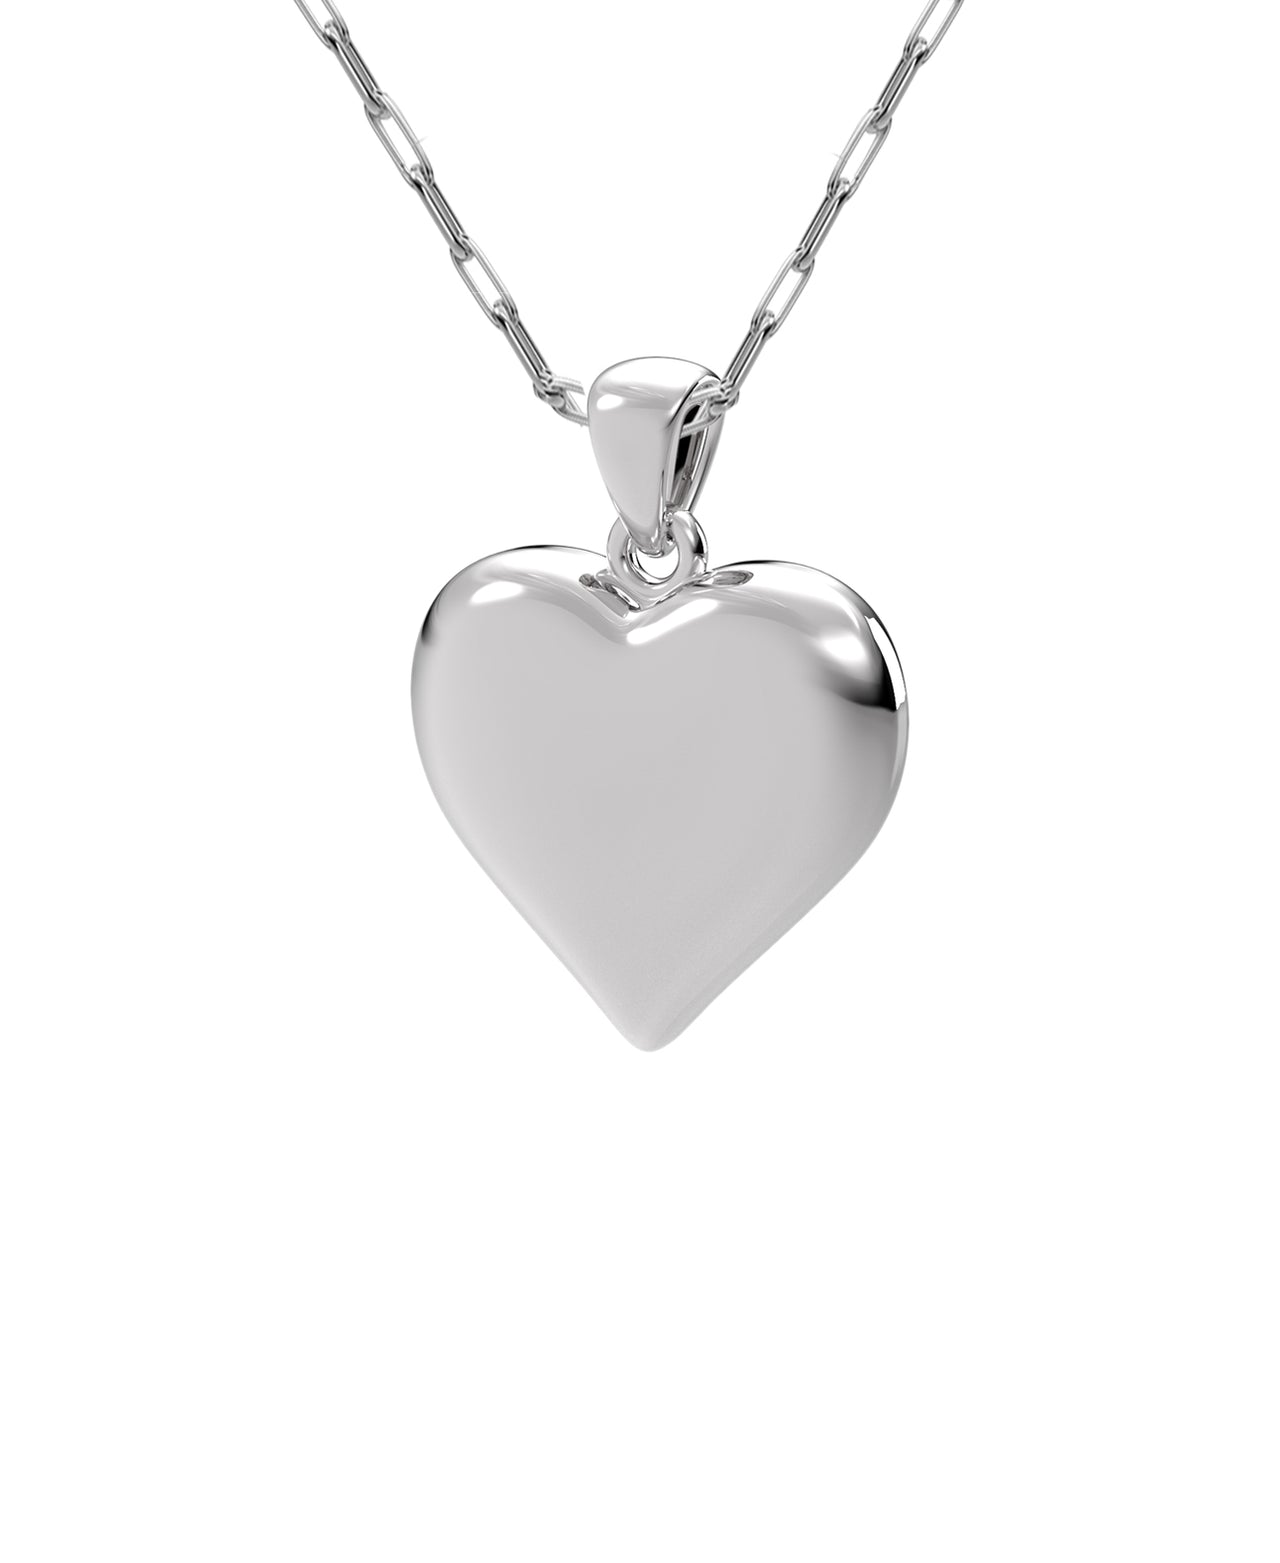 Small Petite Ladies Sterling Silver Heart Pendant Necklace, 15mm